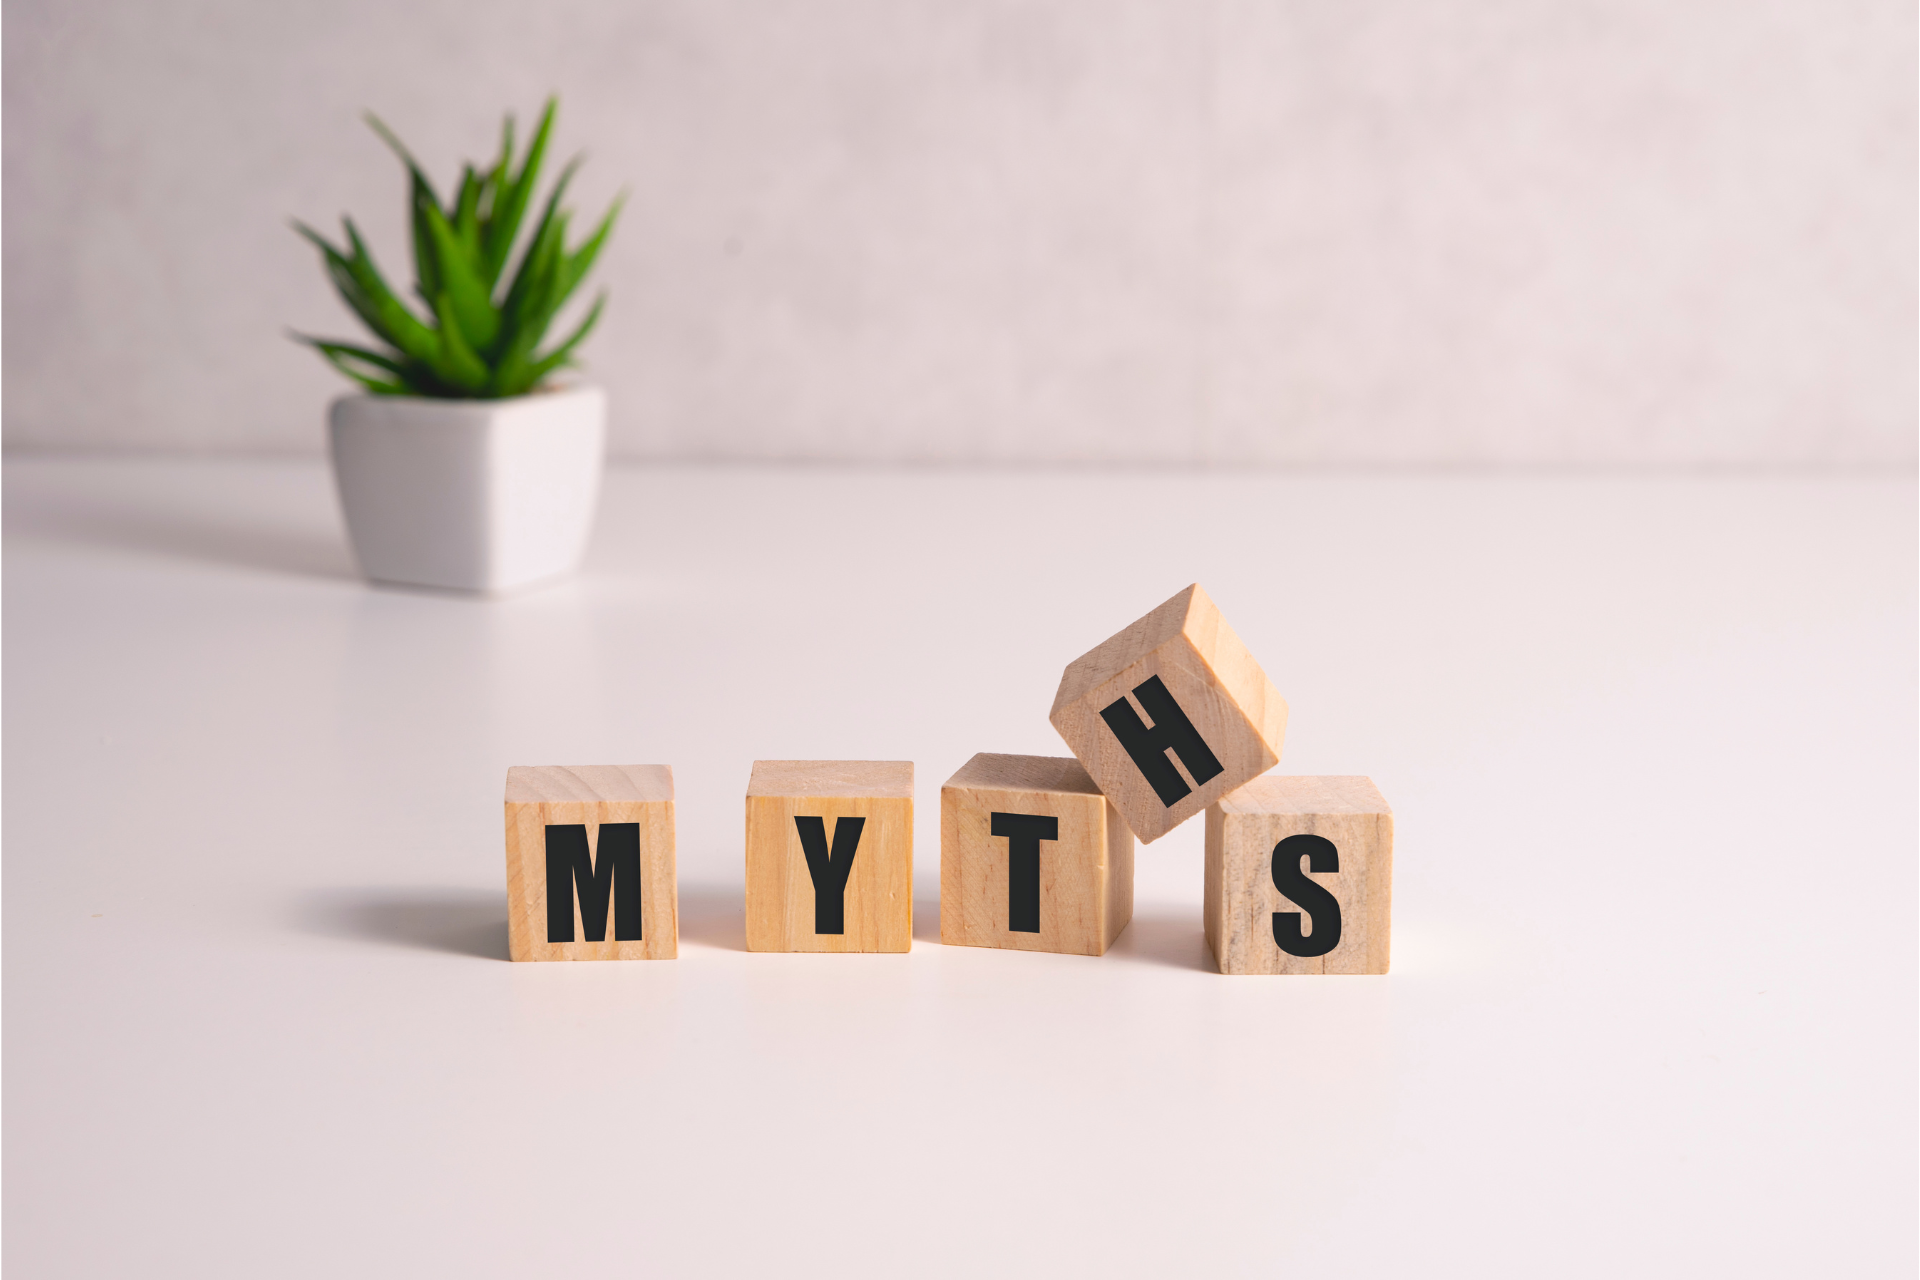 The word myths is written on wooden blocks on a table.